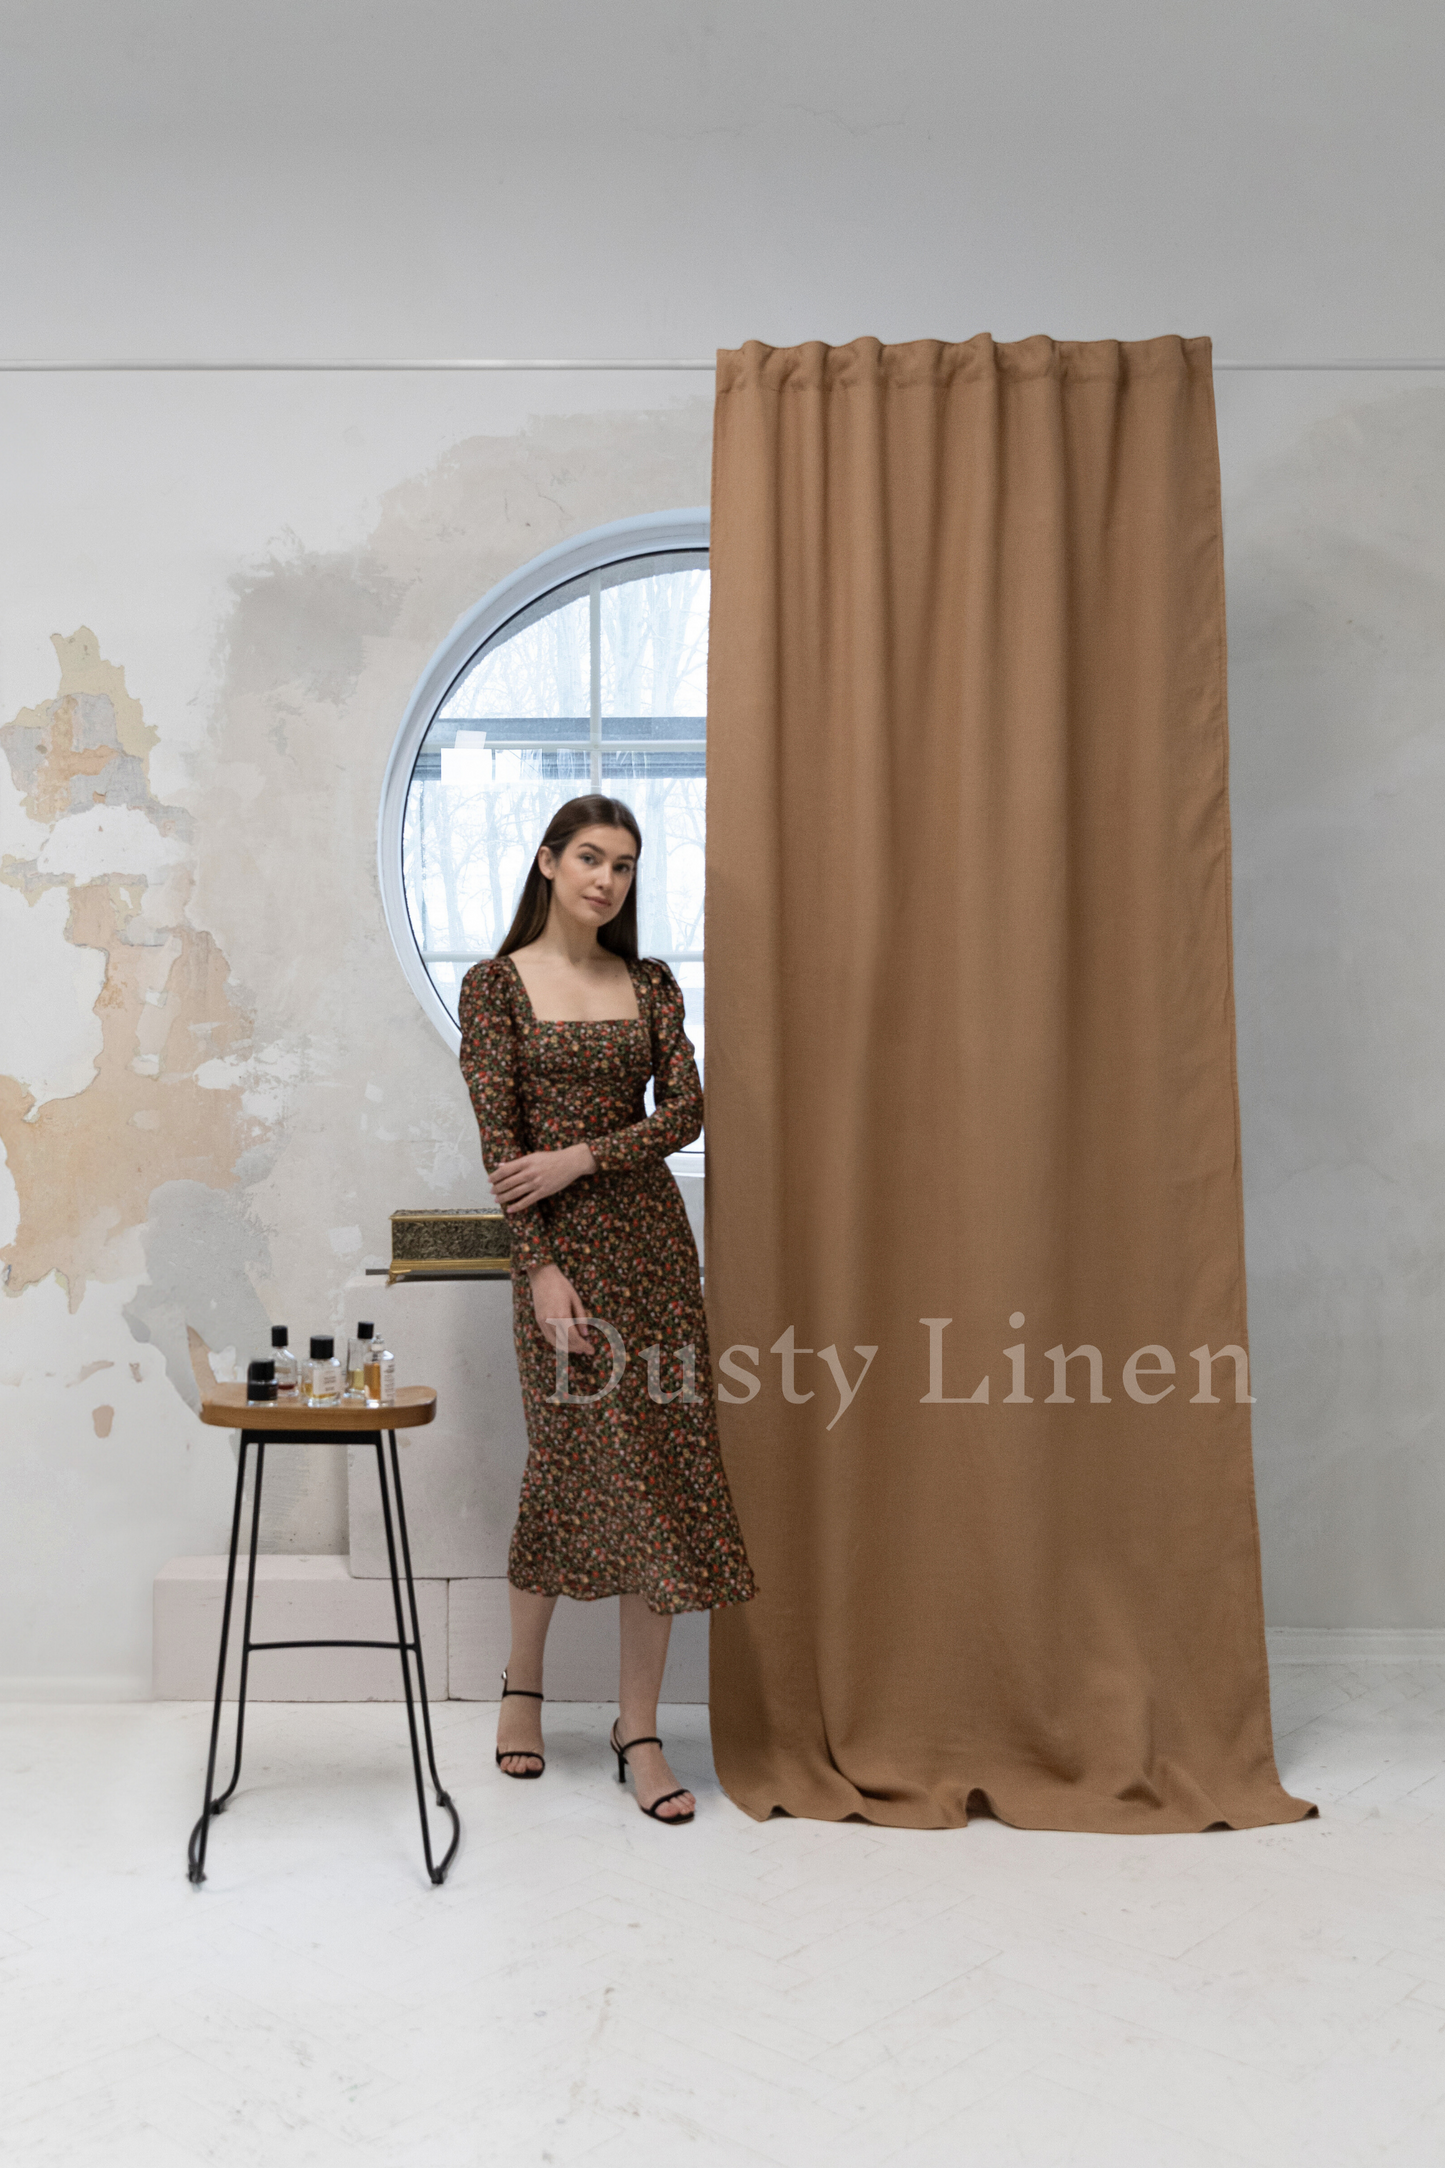 a woman standing in front of a curtain